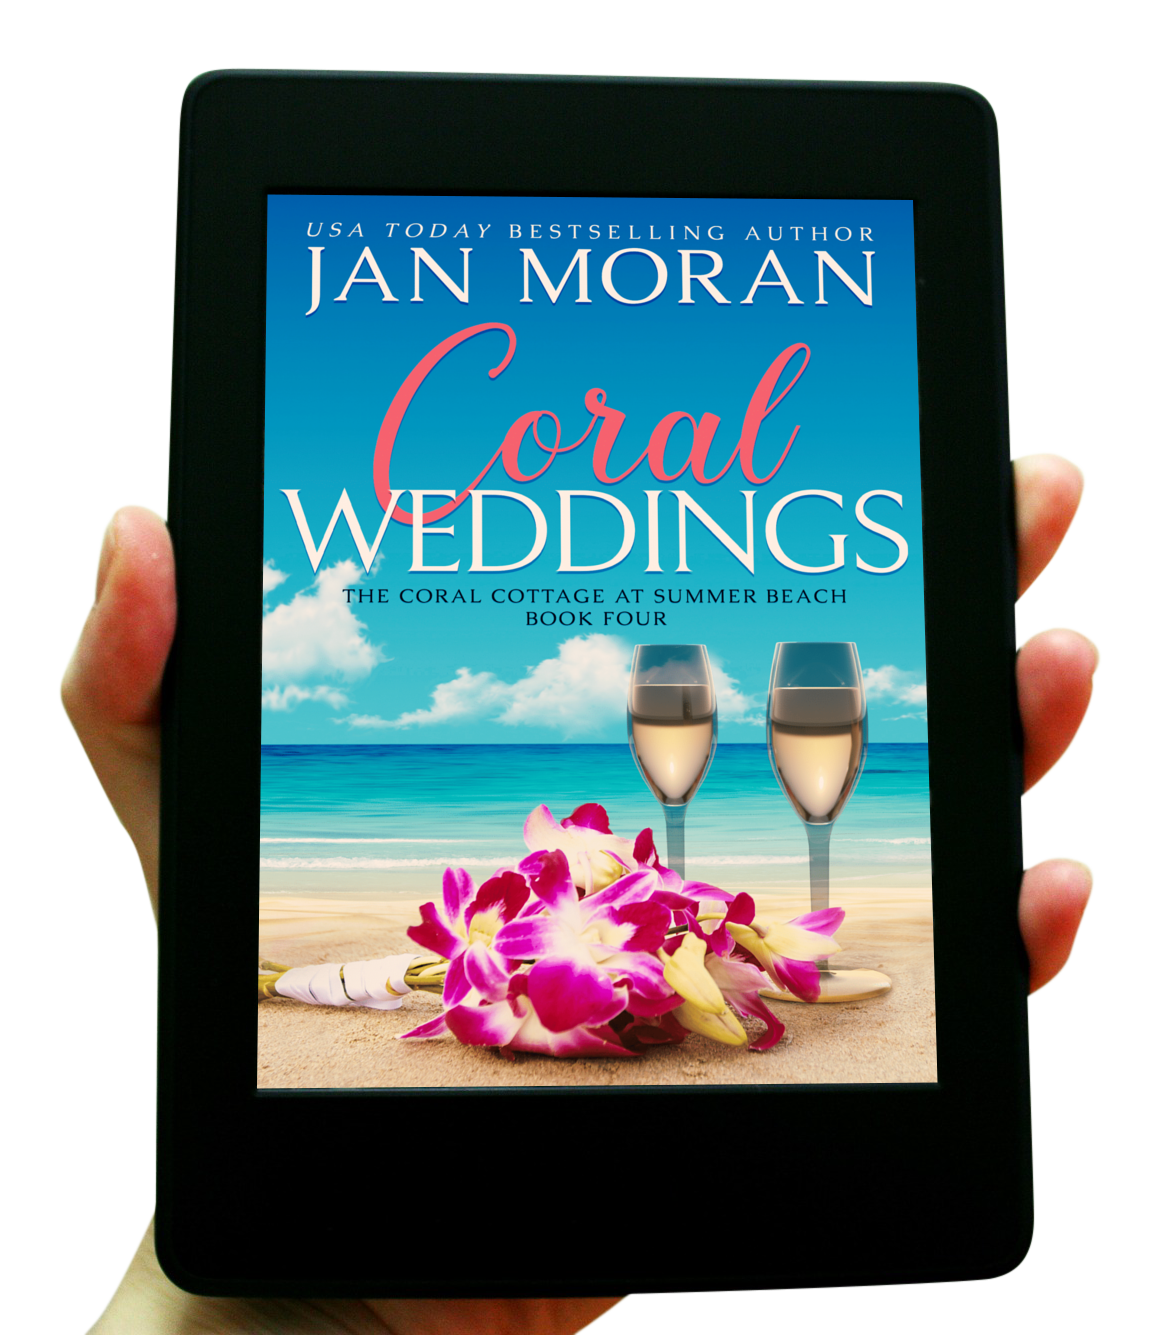 Coral Weddings Audiobook by Jan Moran, Clean, Wholesome, Women's Fiction, small town, Jan Moran, beach reads, clean, wholesome, clean romance, beach reads ebook, beach reads paperback, Mary Kay Andrews, Debbie Macomber, dating, beach saga, summer read, vacation, women, dating, love, romance, romantic, chick lit, fun, womens fiction, beach, holiday, friendship, relationships, California, Elin Hilderbrand, Mary Alice Monroe